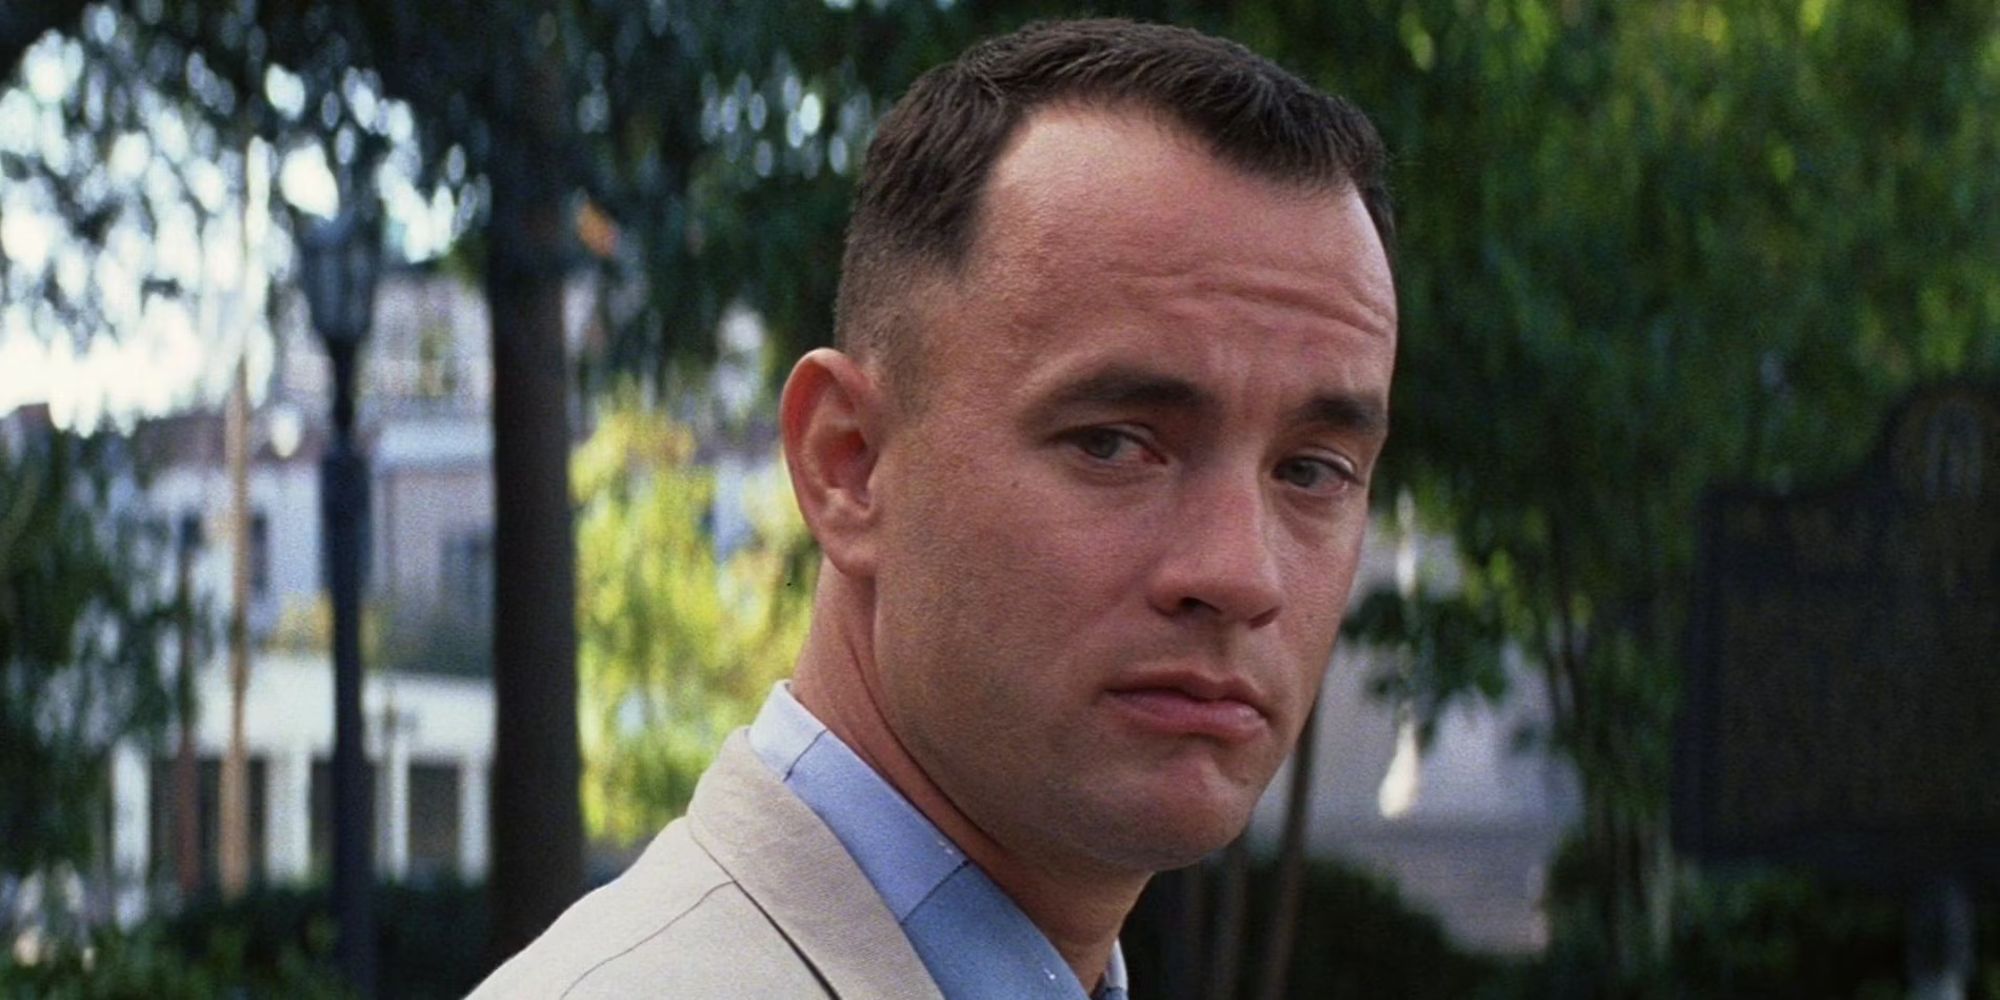 Tom Hanks as Forest Gump sitting on a bench